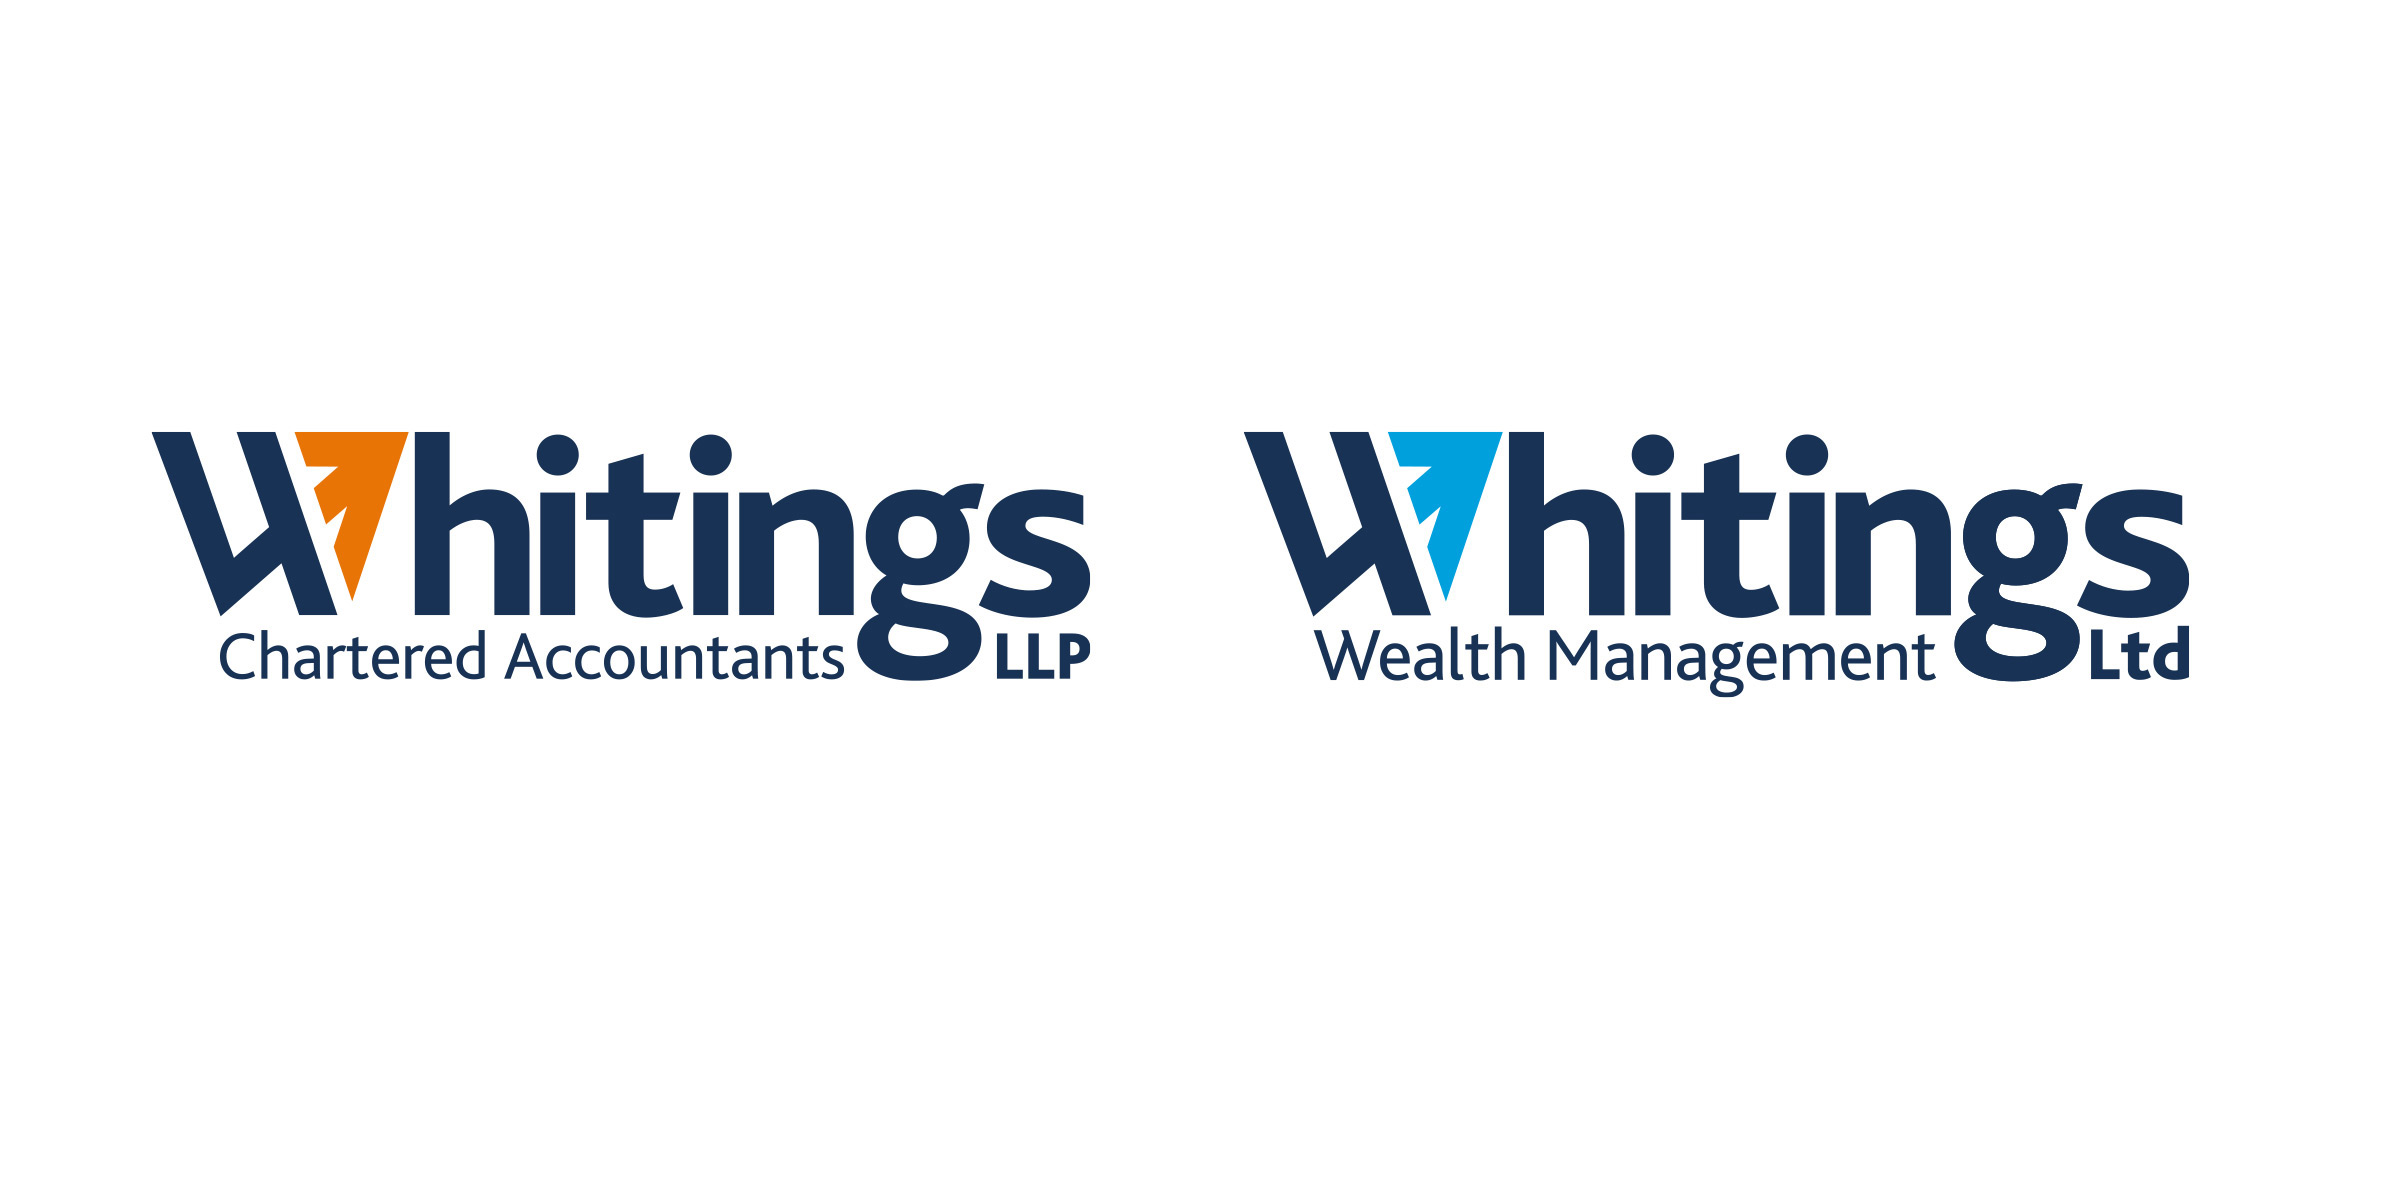 Whitings LLP